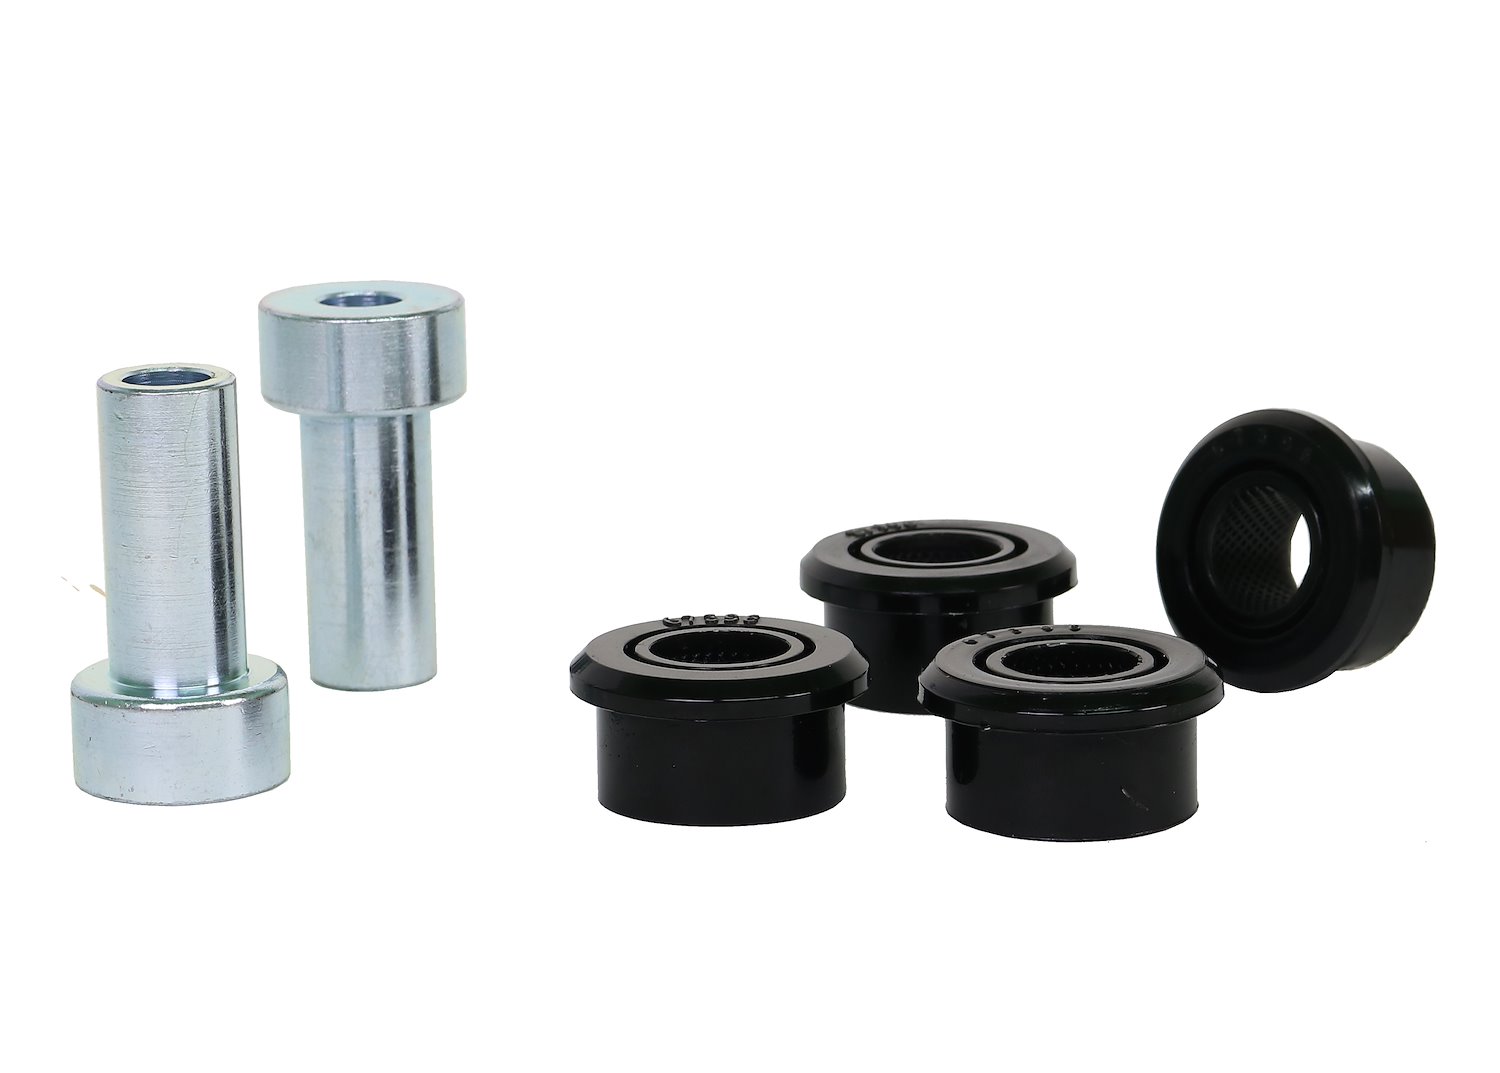 W63397 Rear Control Arm Upper Outer Bushing Kit for 1999-2009 Subaru Legacy, 1999-2009 Outback